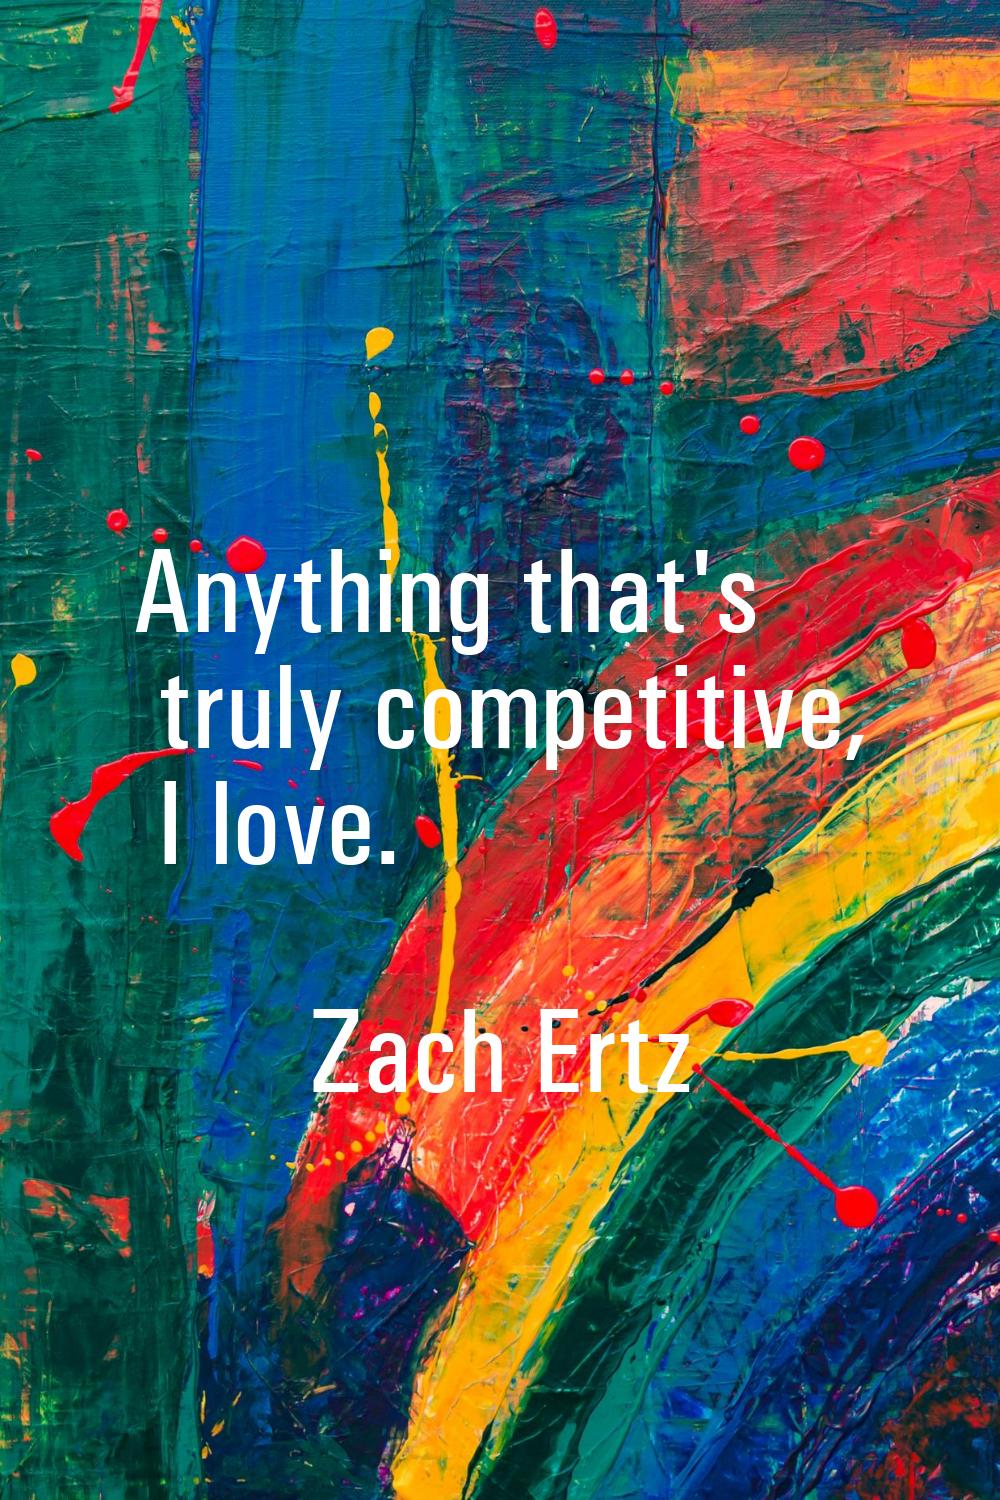 Anything that's truly competitive, I love.